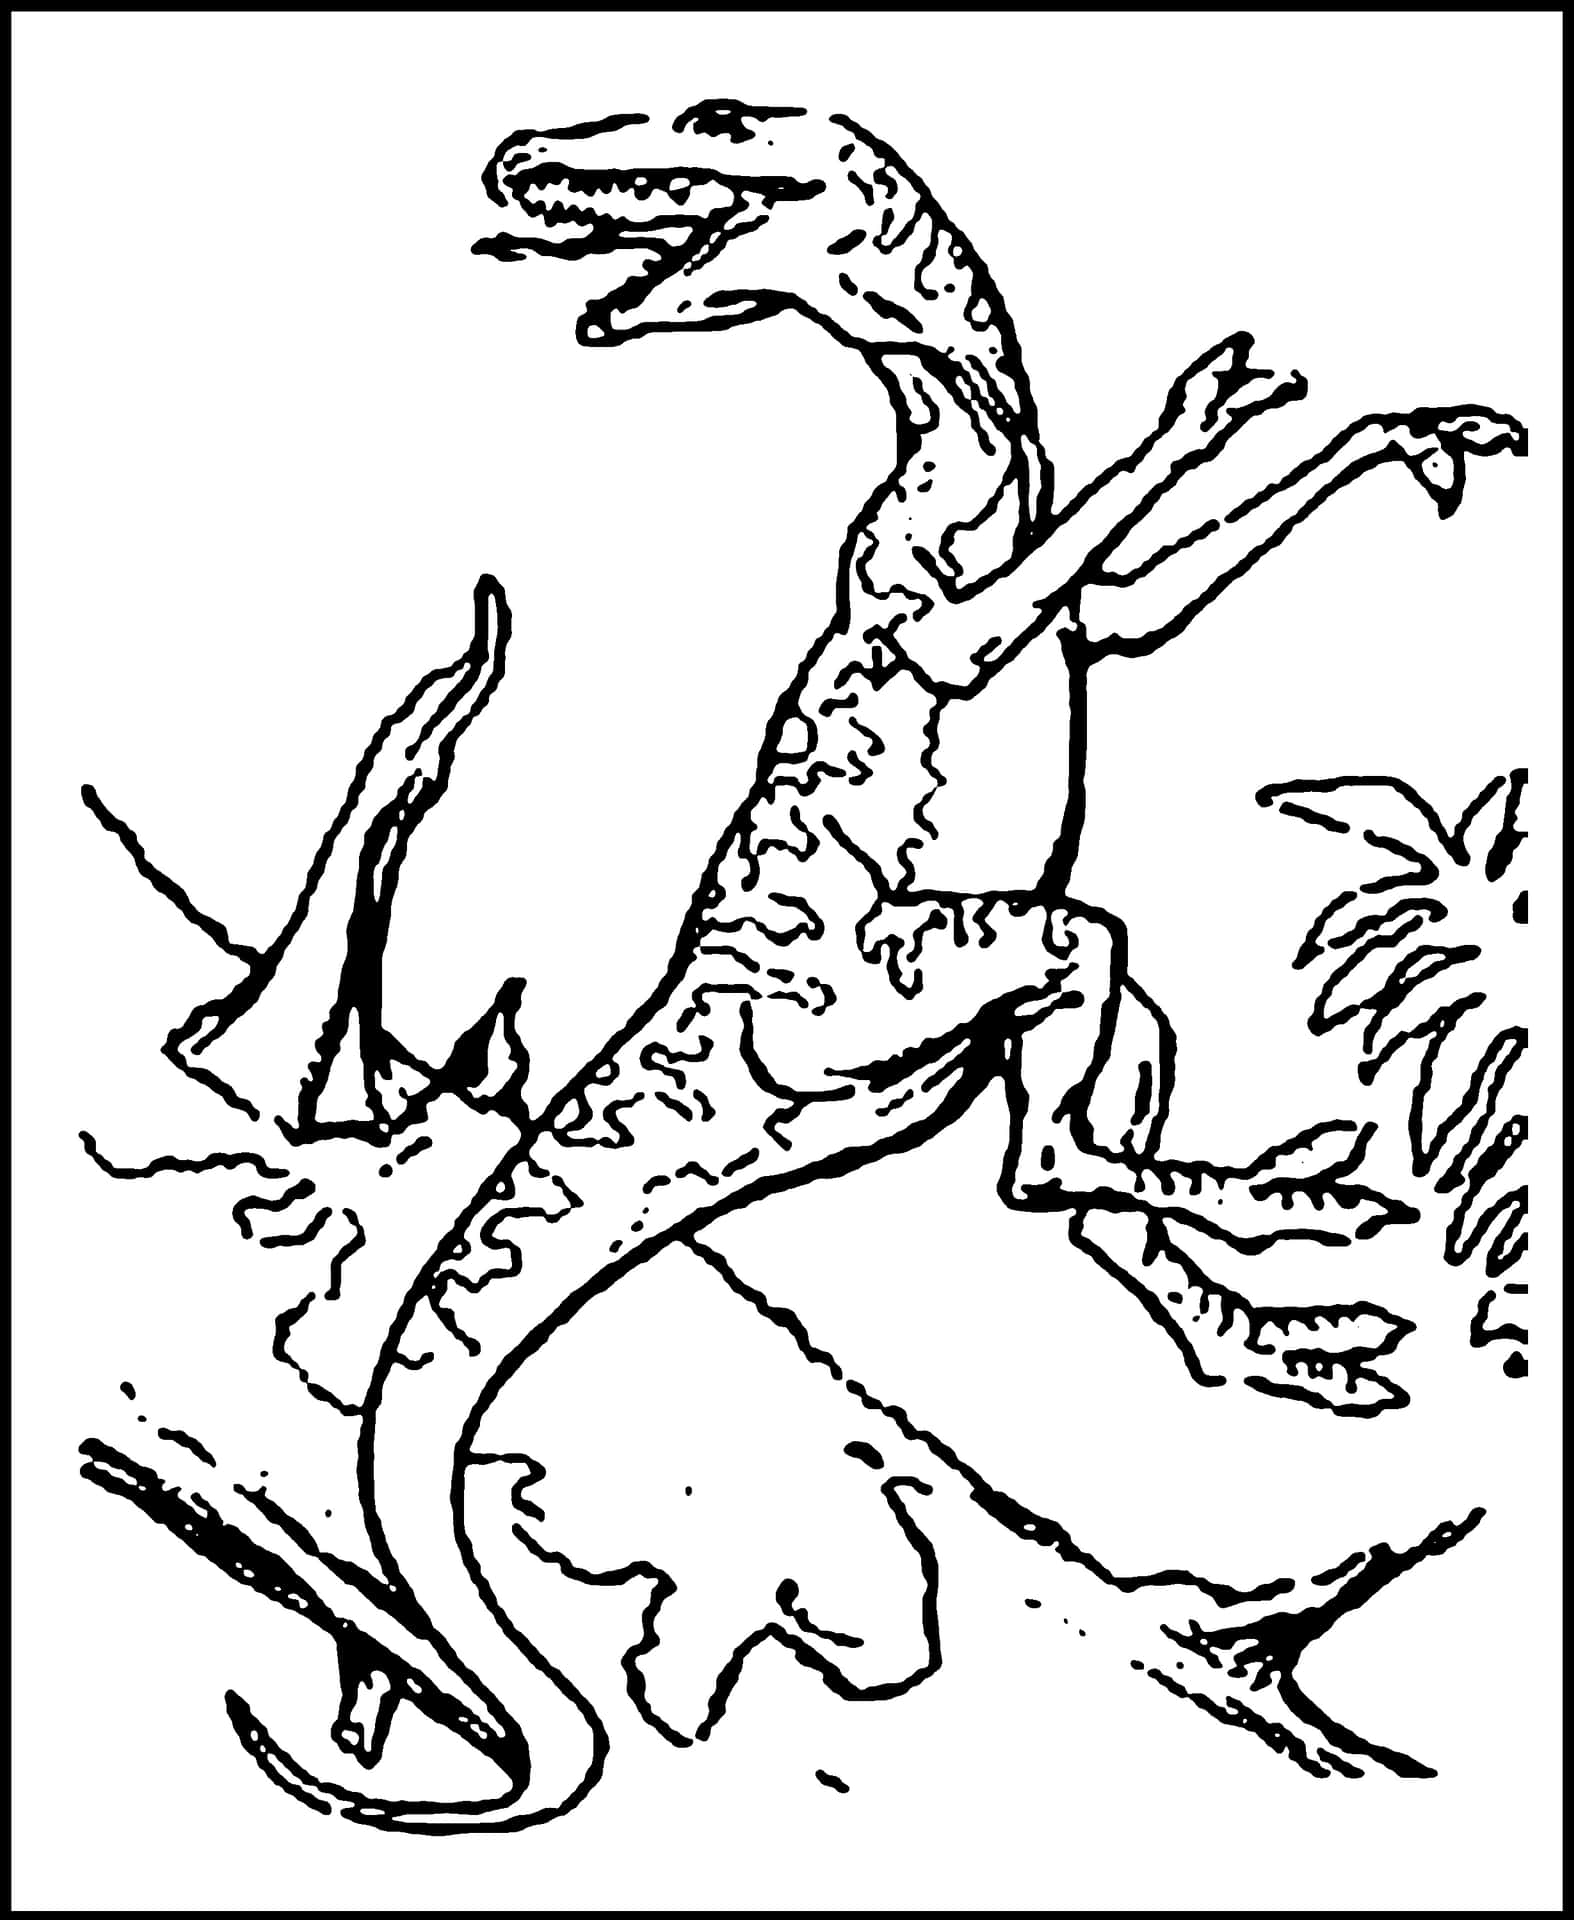 A Dinosaur Coloring Page With A Dinosaur On The Ground